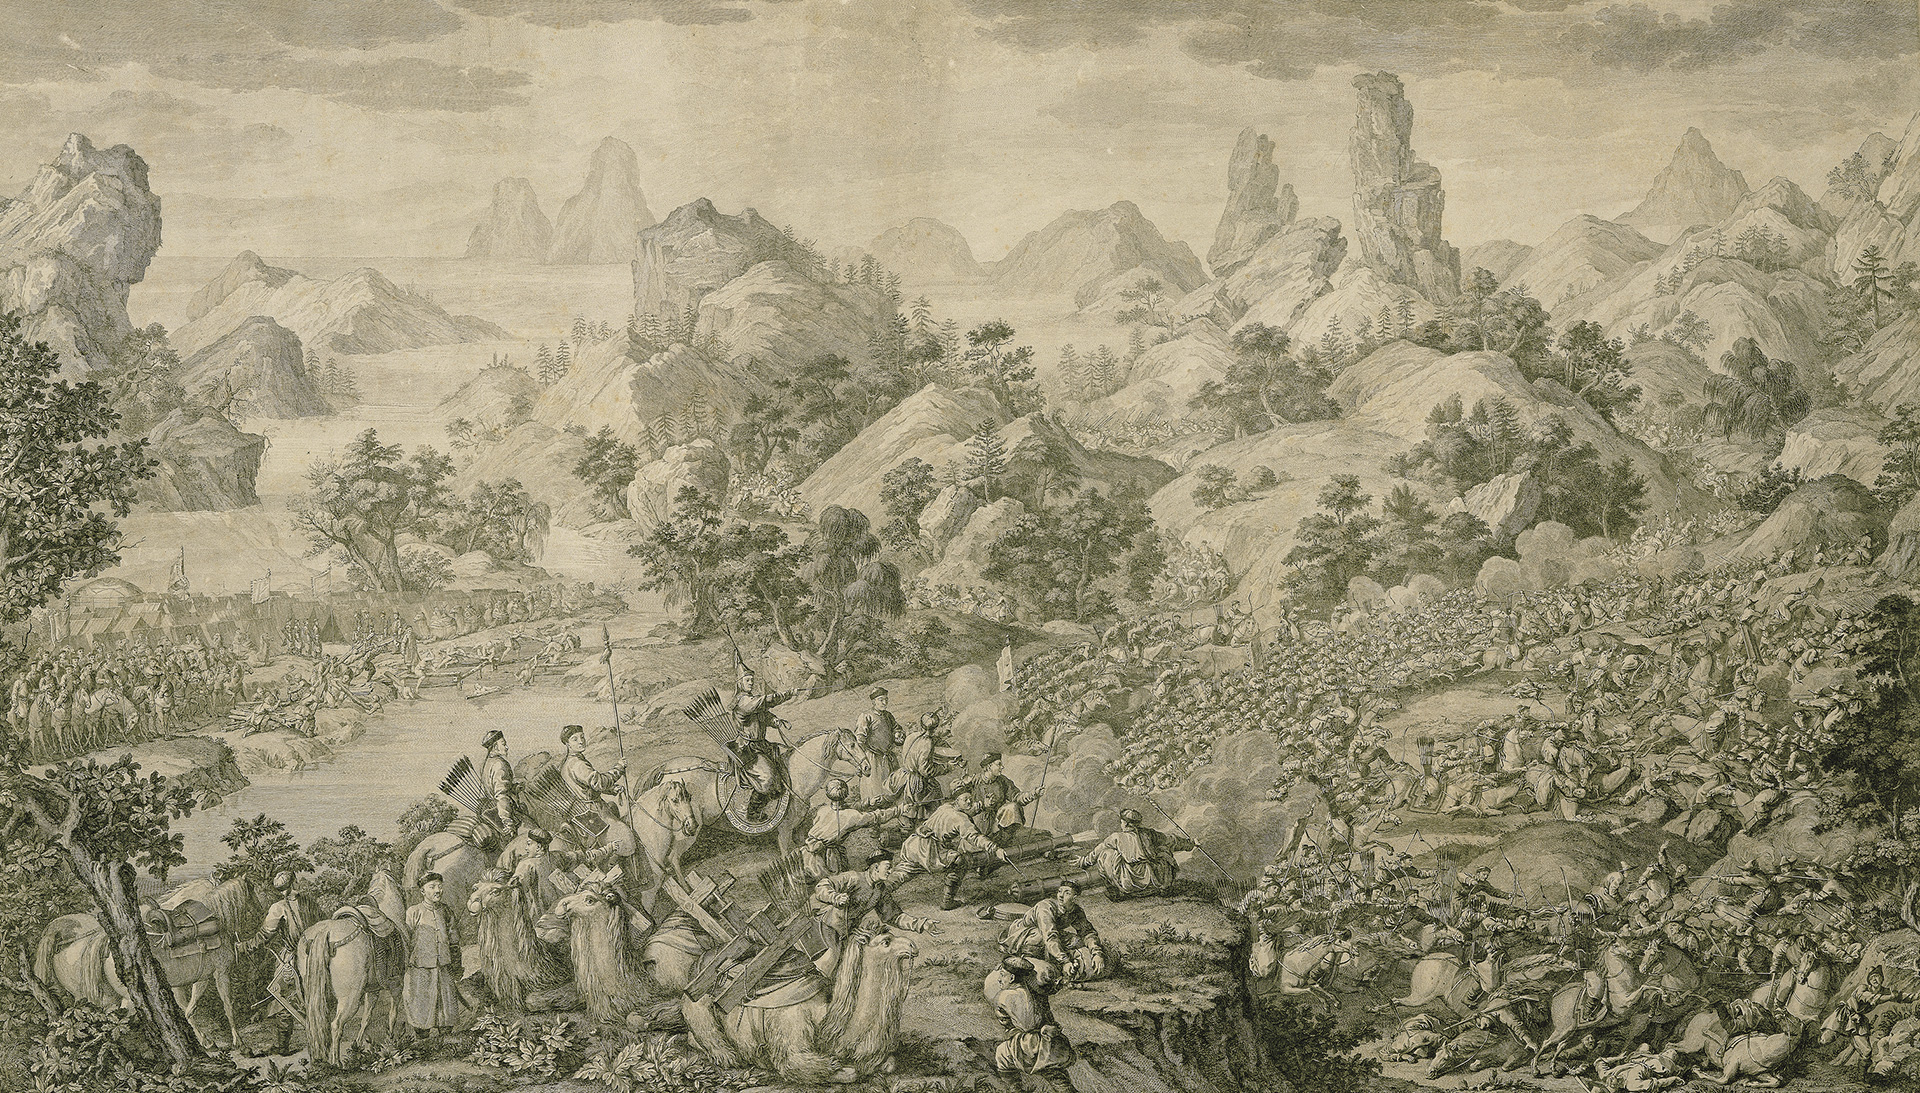 Copperplate engraving of the Lifting of the Siege at the Black Water River from Victory in the Pacification of Dzungars and Muslims